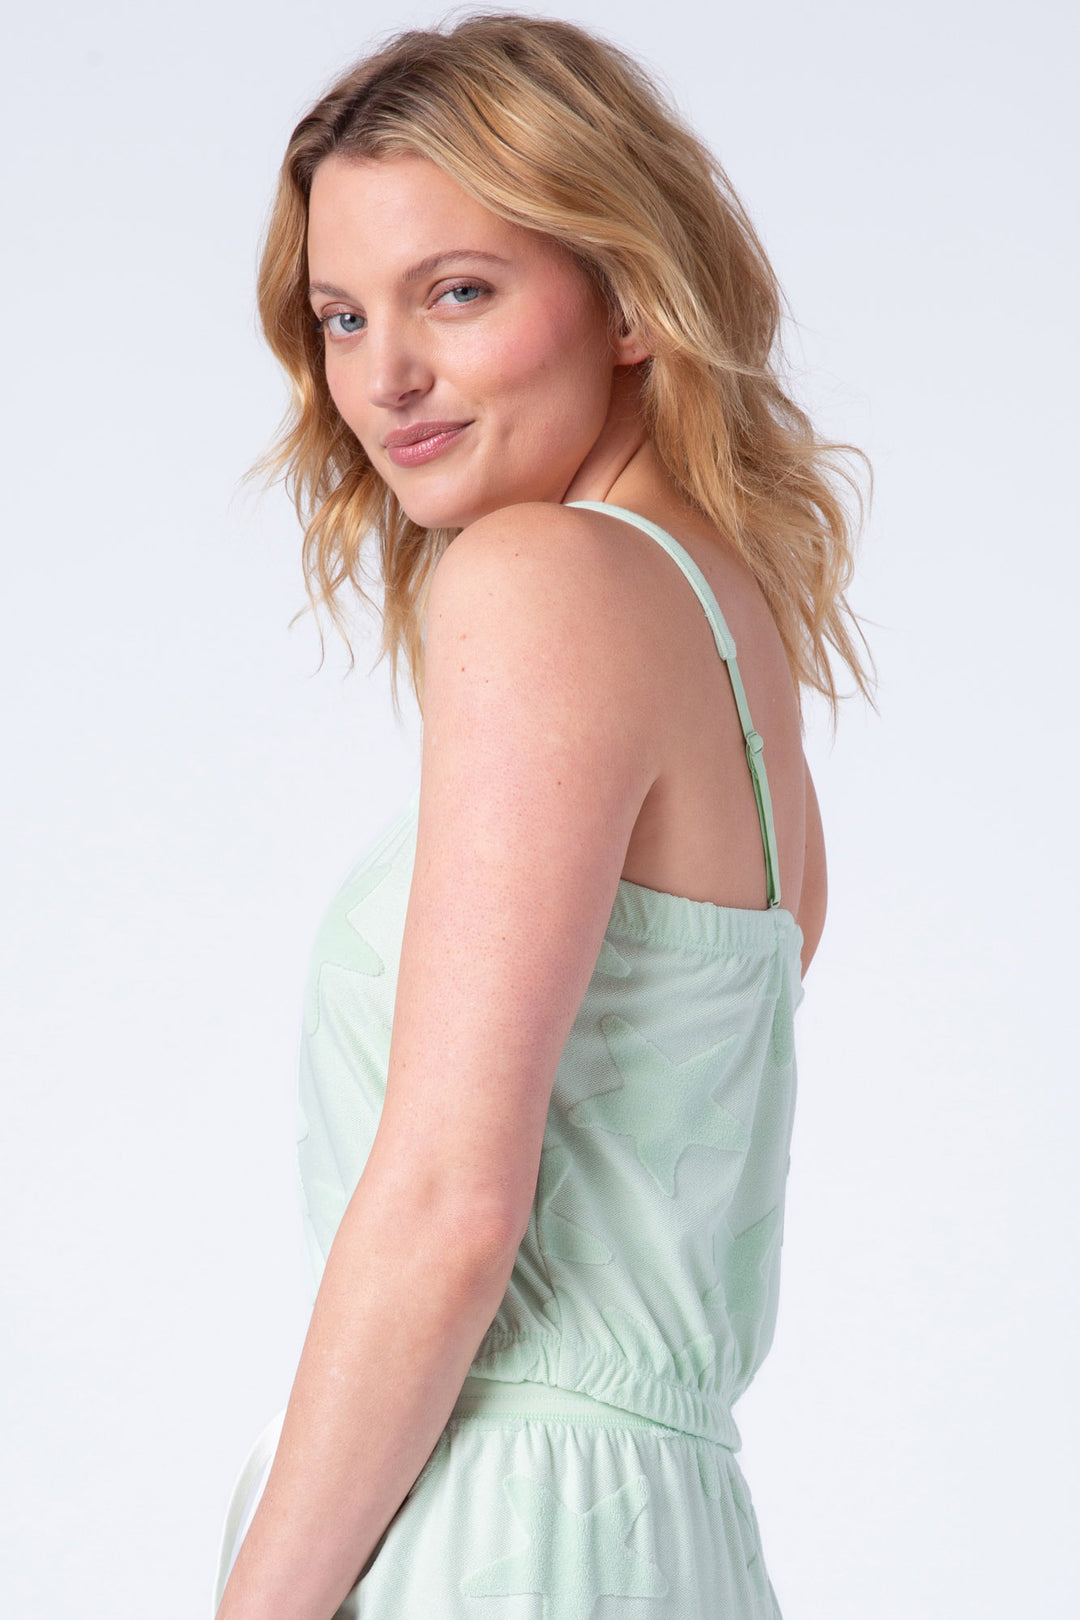 Women's cami tank with removable straps in green jacquard terry knit. Elasticized waist & chest.